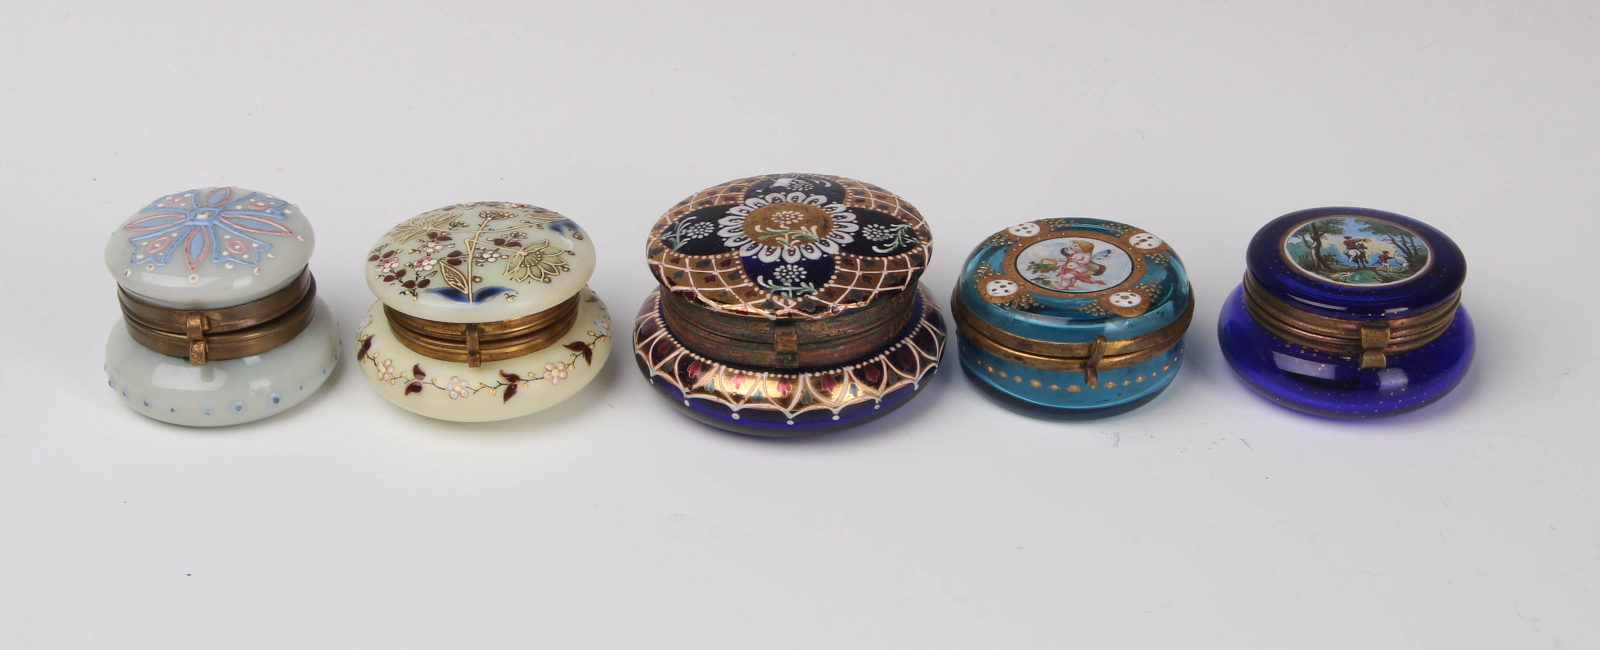 FIVE ENAMELED VICTORIAN ART GLASS RING BOXES